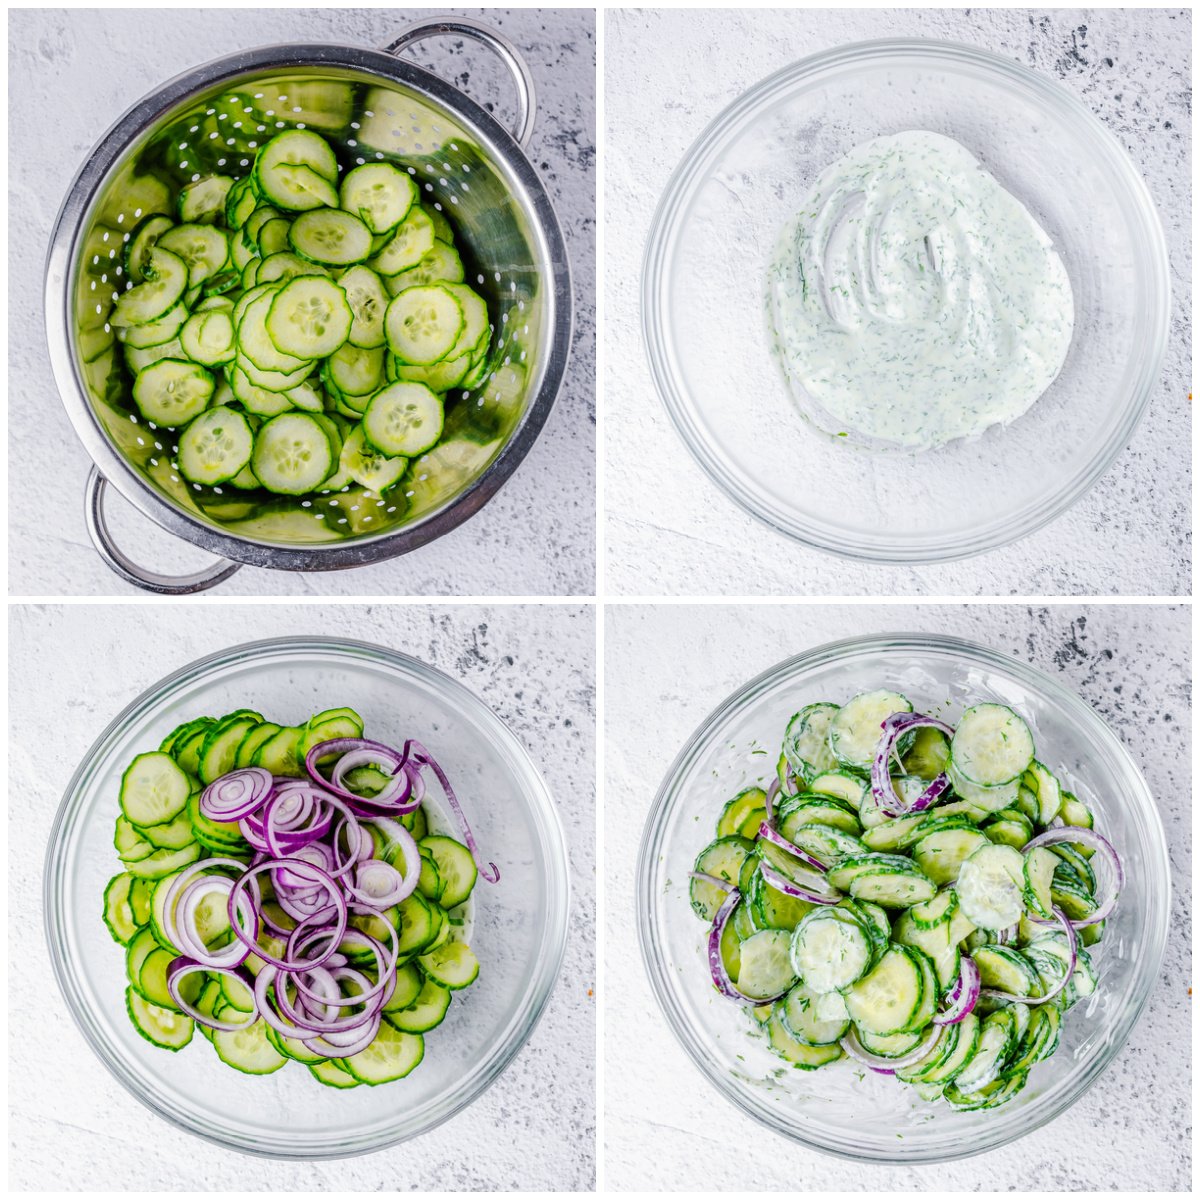 Step by step photos on how to make Dill Cucumber Salad